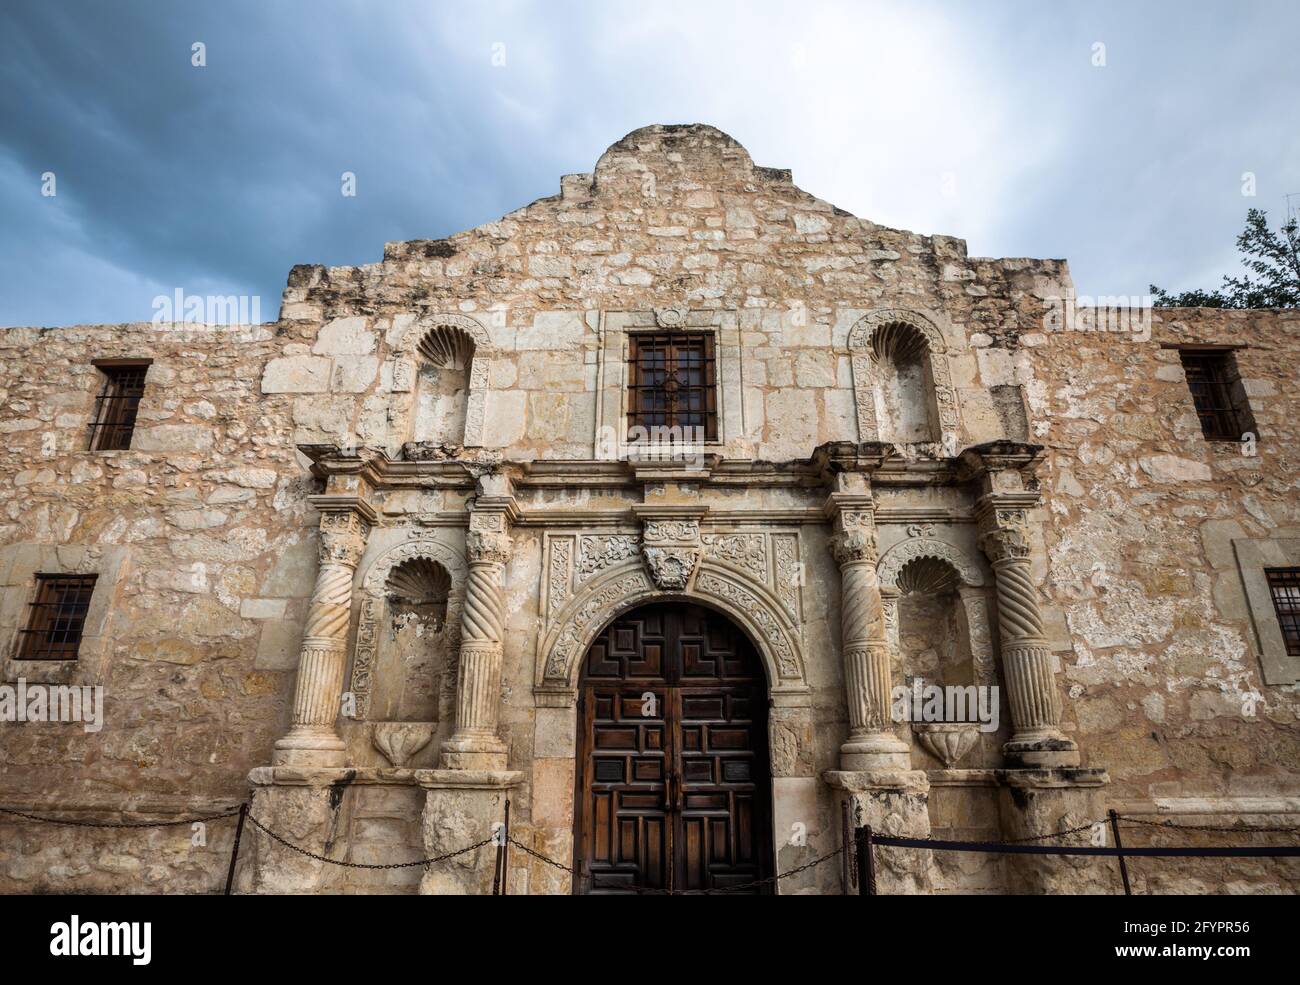 The Alamo, an American icon in the Republic of Texas, site of the Battle of the Alamo on March 6, 1836 Stock Photo